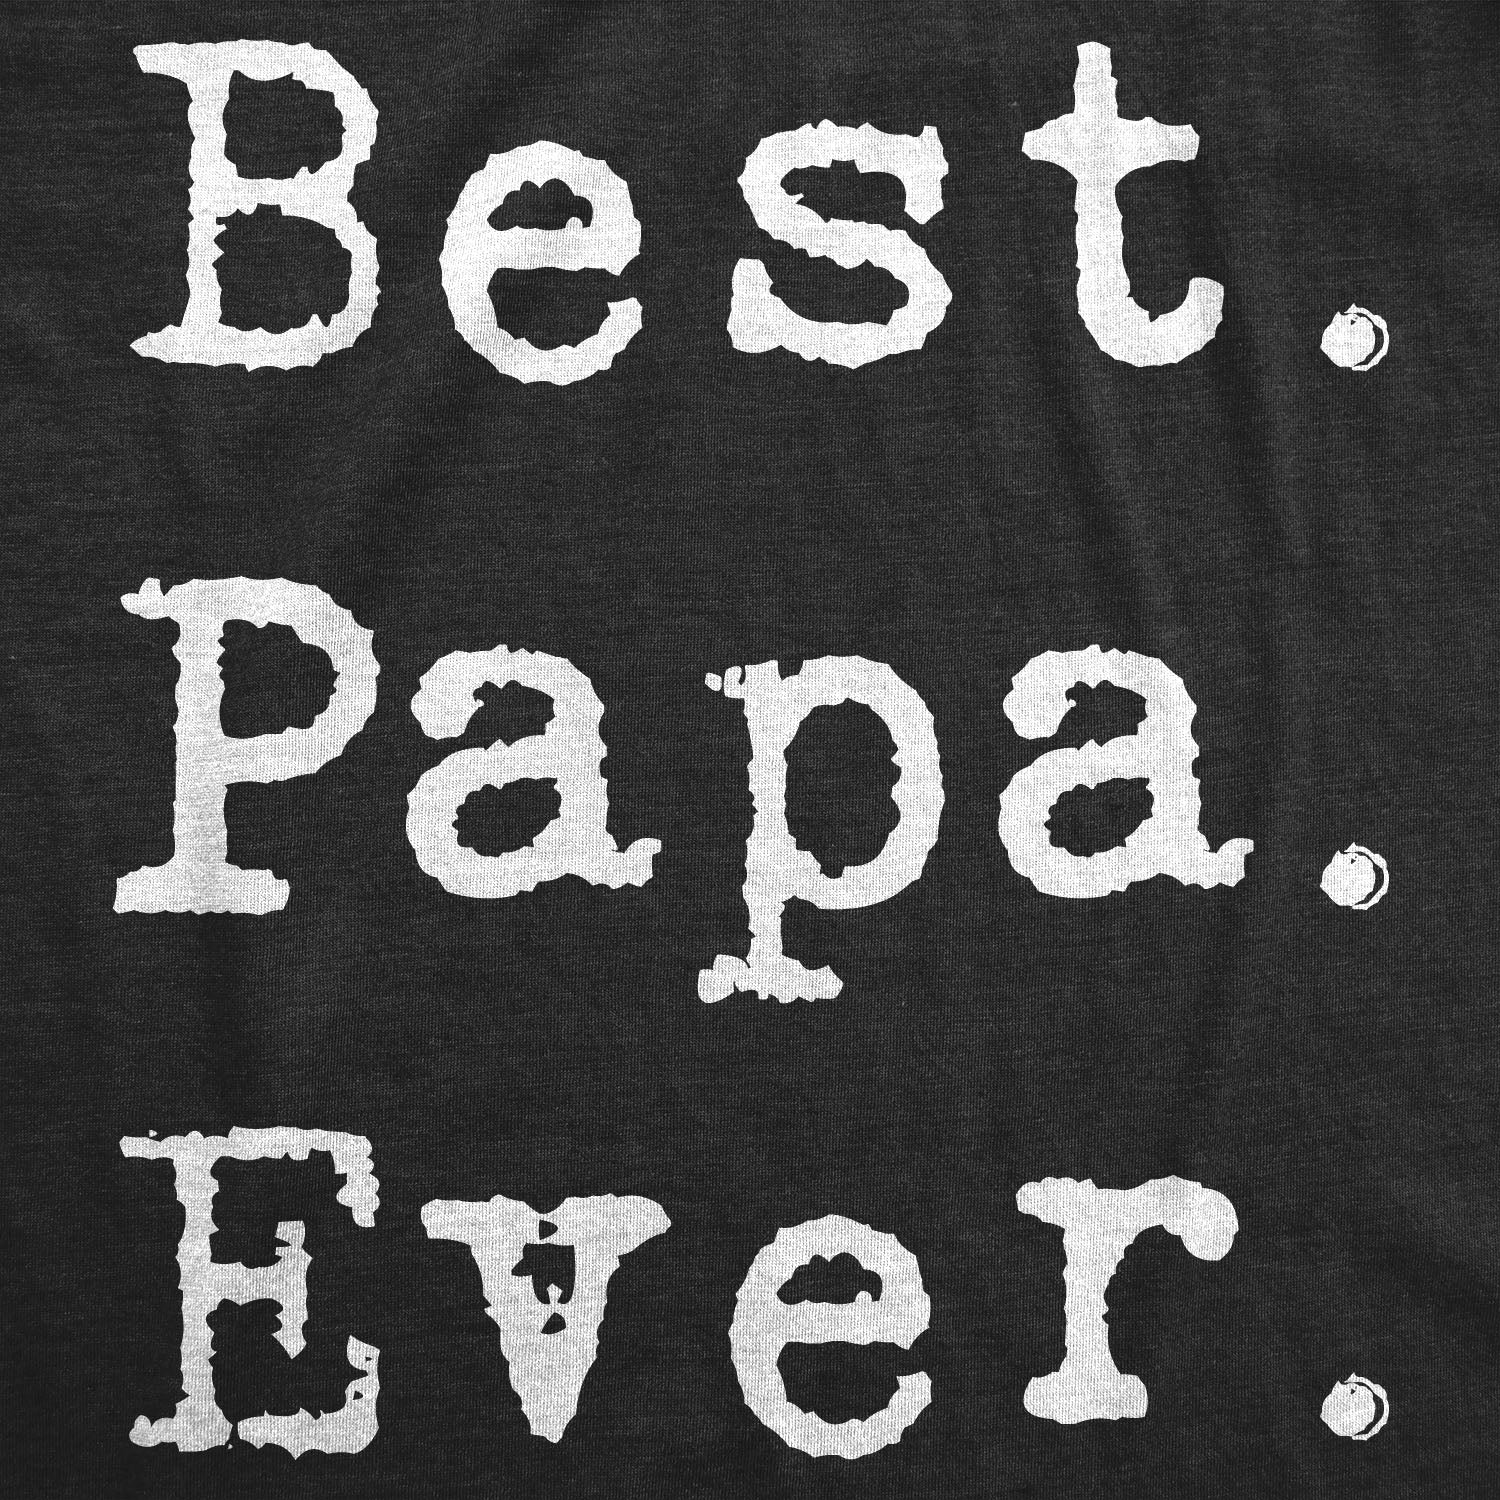 Funny Heather Black - Best Papa Ever Best Papa Ever Mens T Shirt Nerdy Father's Day Tee